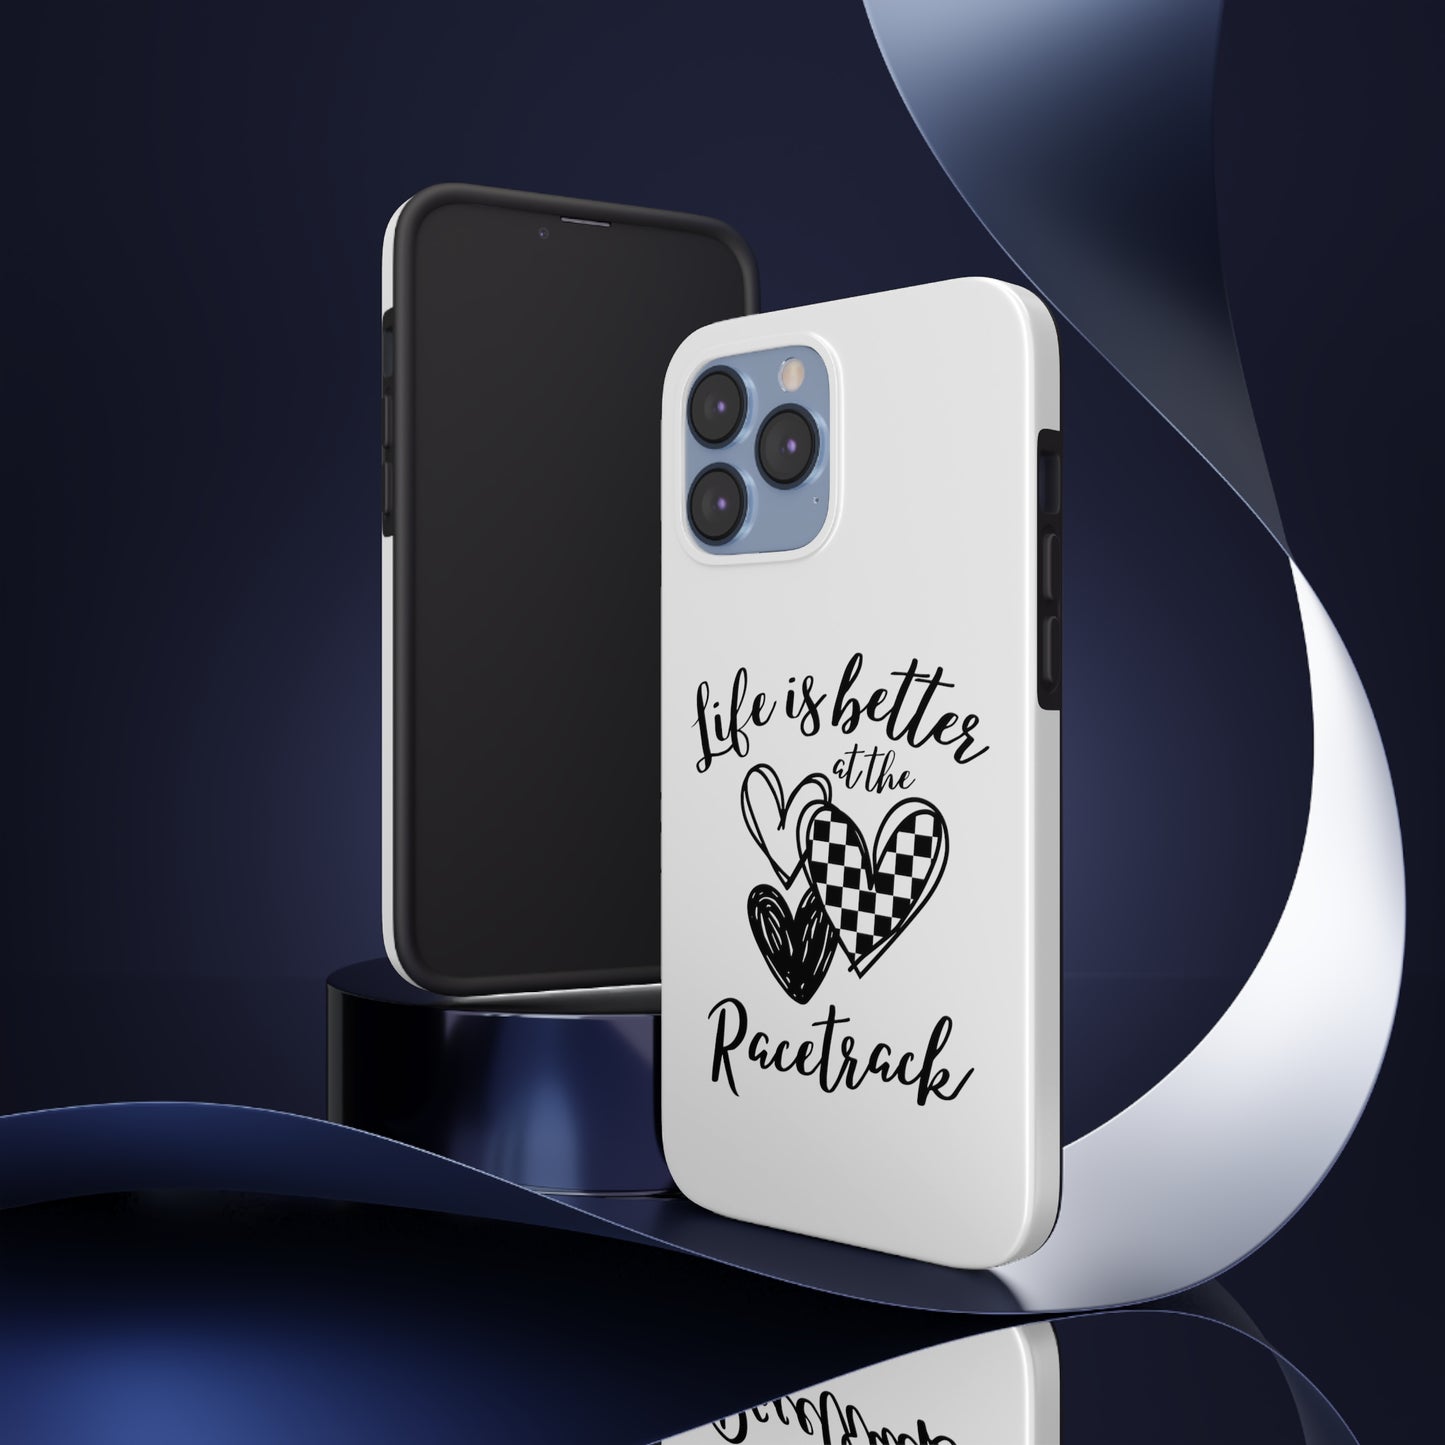 Life Is Better At The Racetrack White Tough Phone Cases